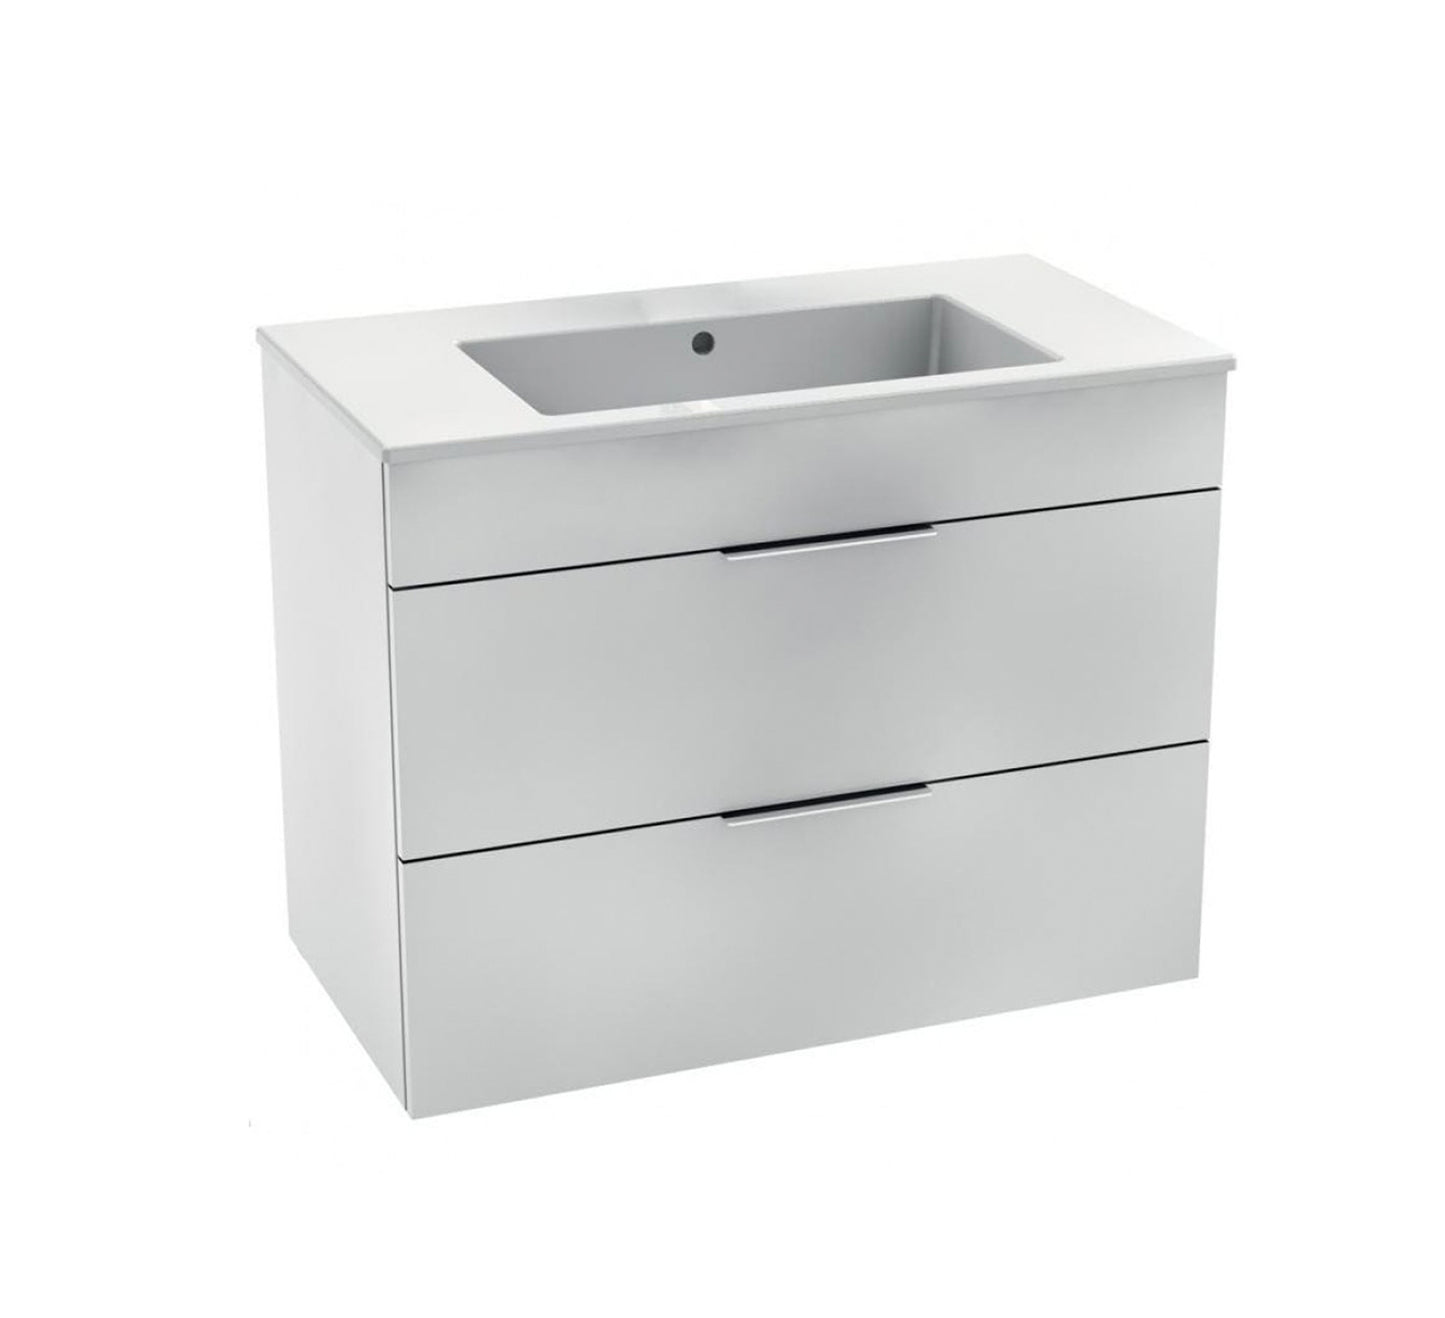 JIKA CUBE SLIM VANITY UNIT PACK WITH BLACK HANDLES INCLUDING WASHBASIN 100X43CM WITH TWO DRAWER H607/W980/D422 MM WHITE - 4.5365.2.176.300.1